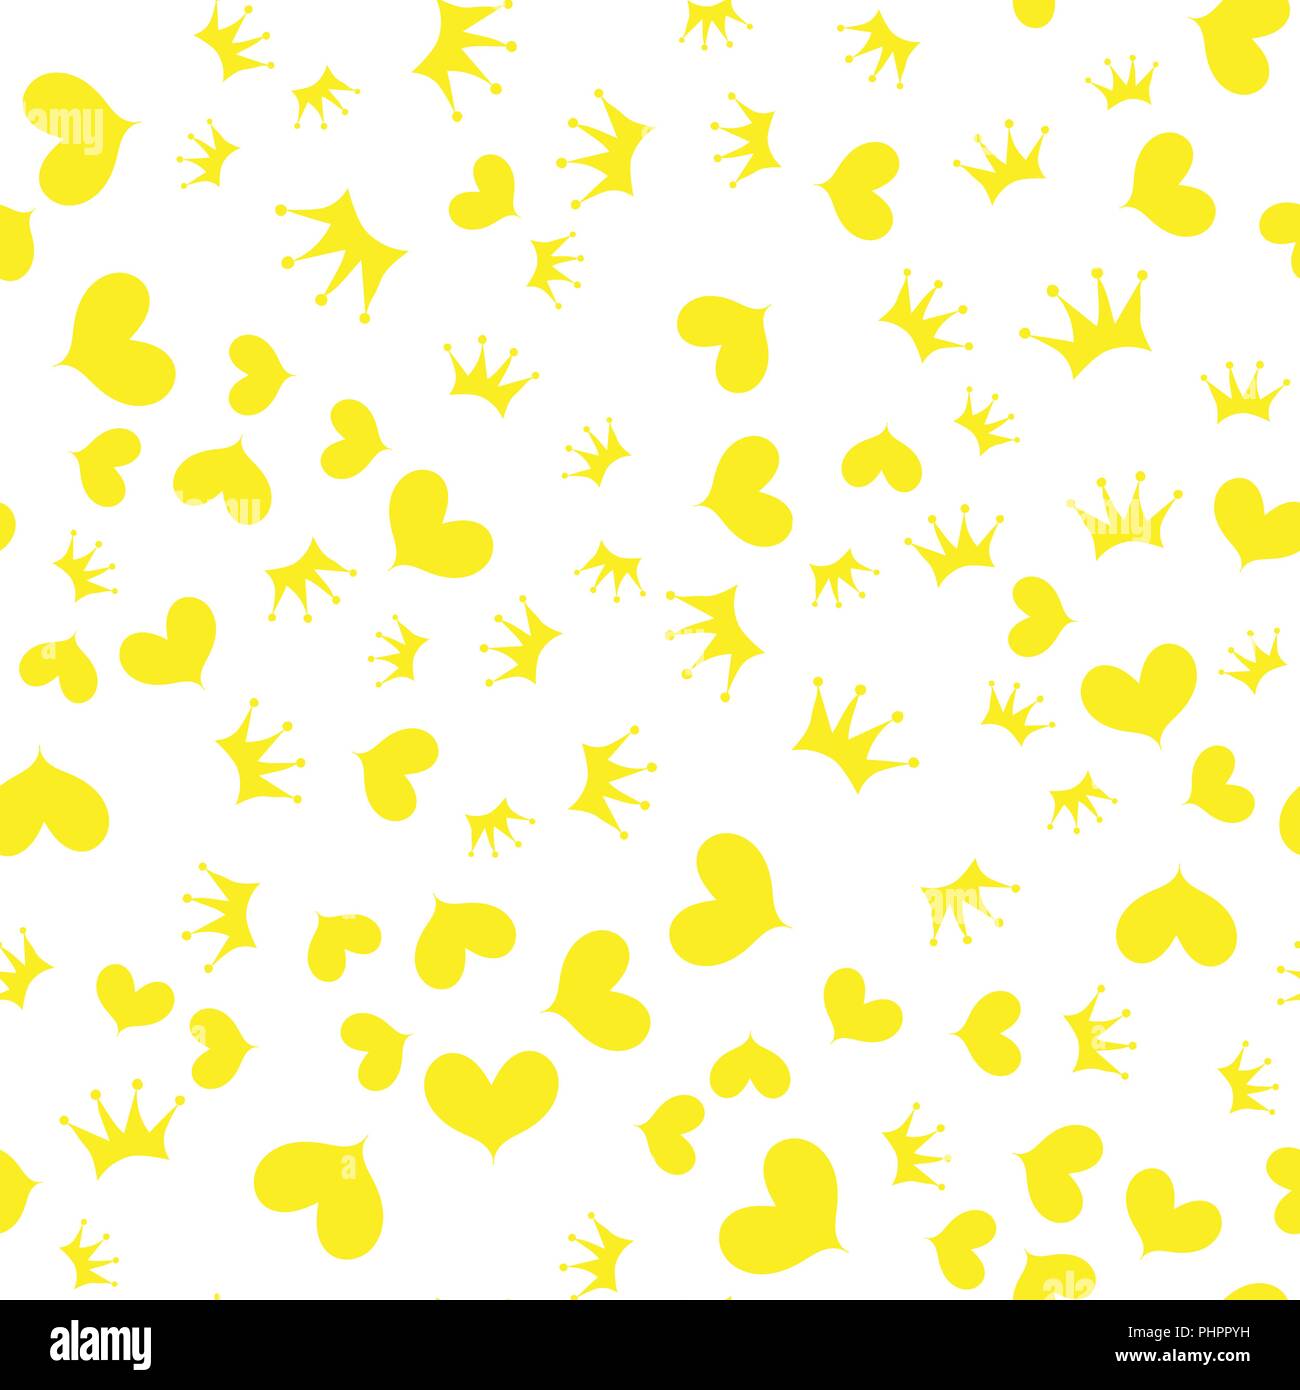 Vector illustration. Seamless pattern. Crown and yellow heart on a white background Stock Vector